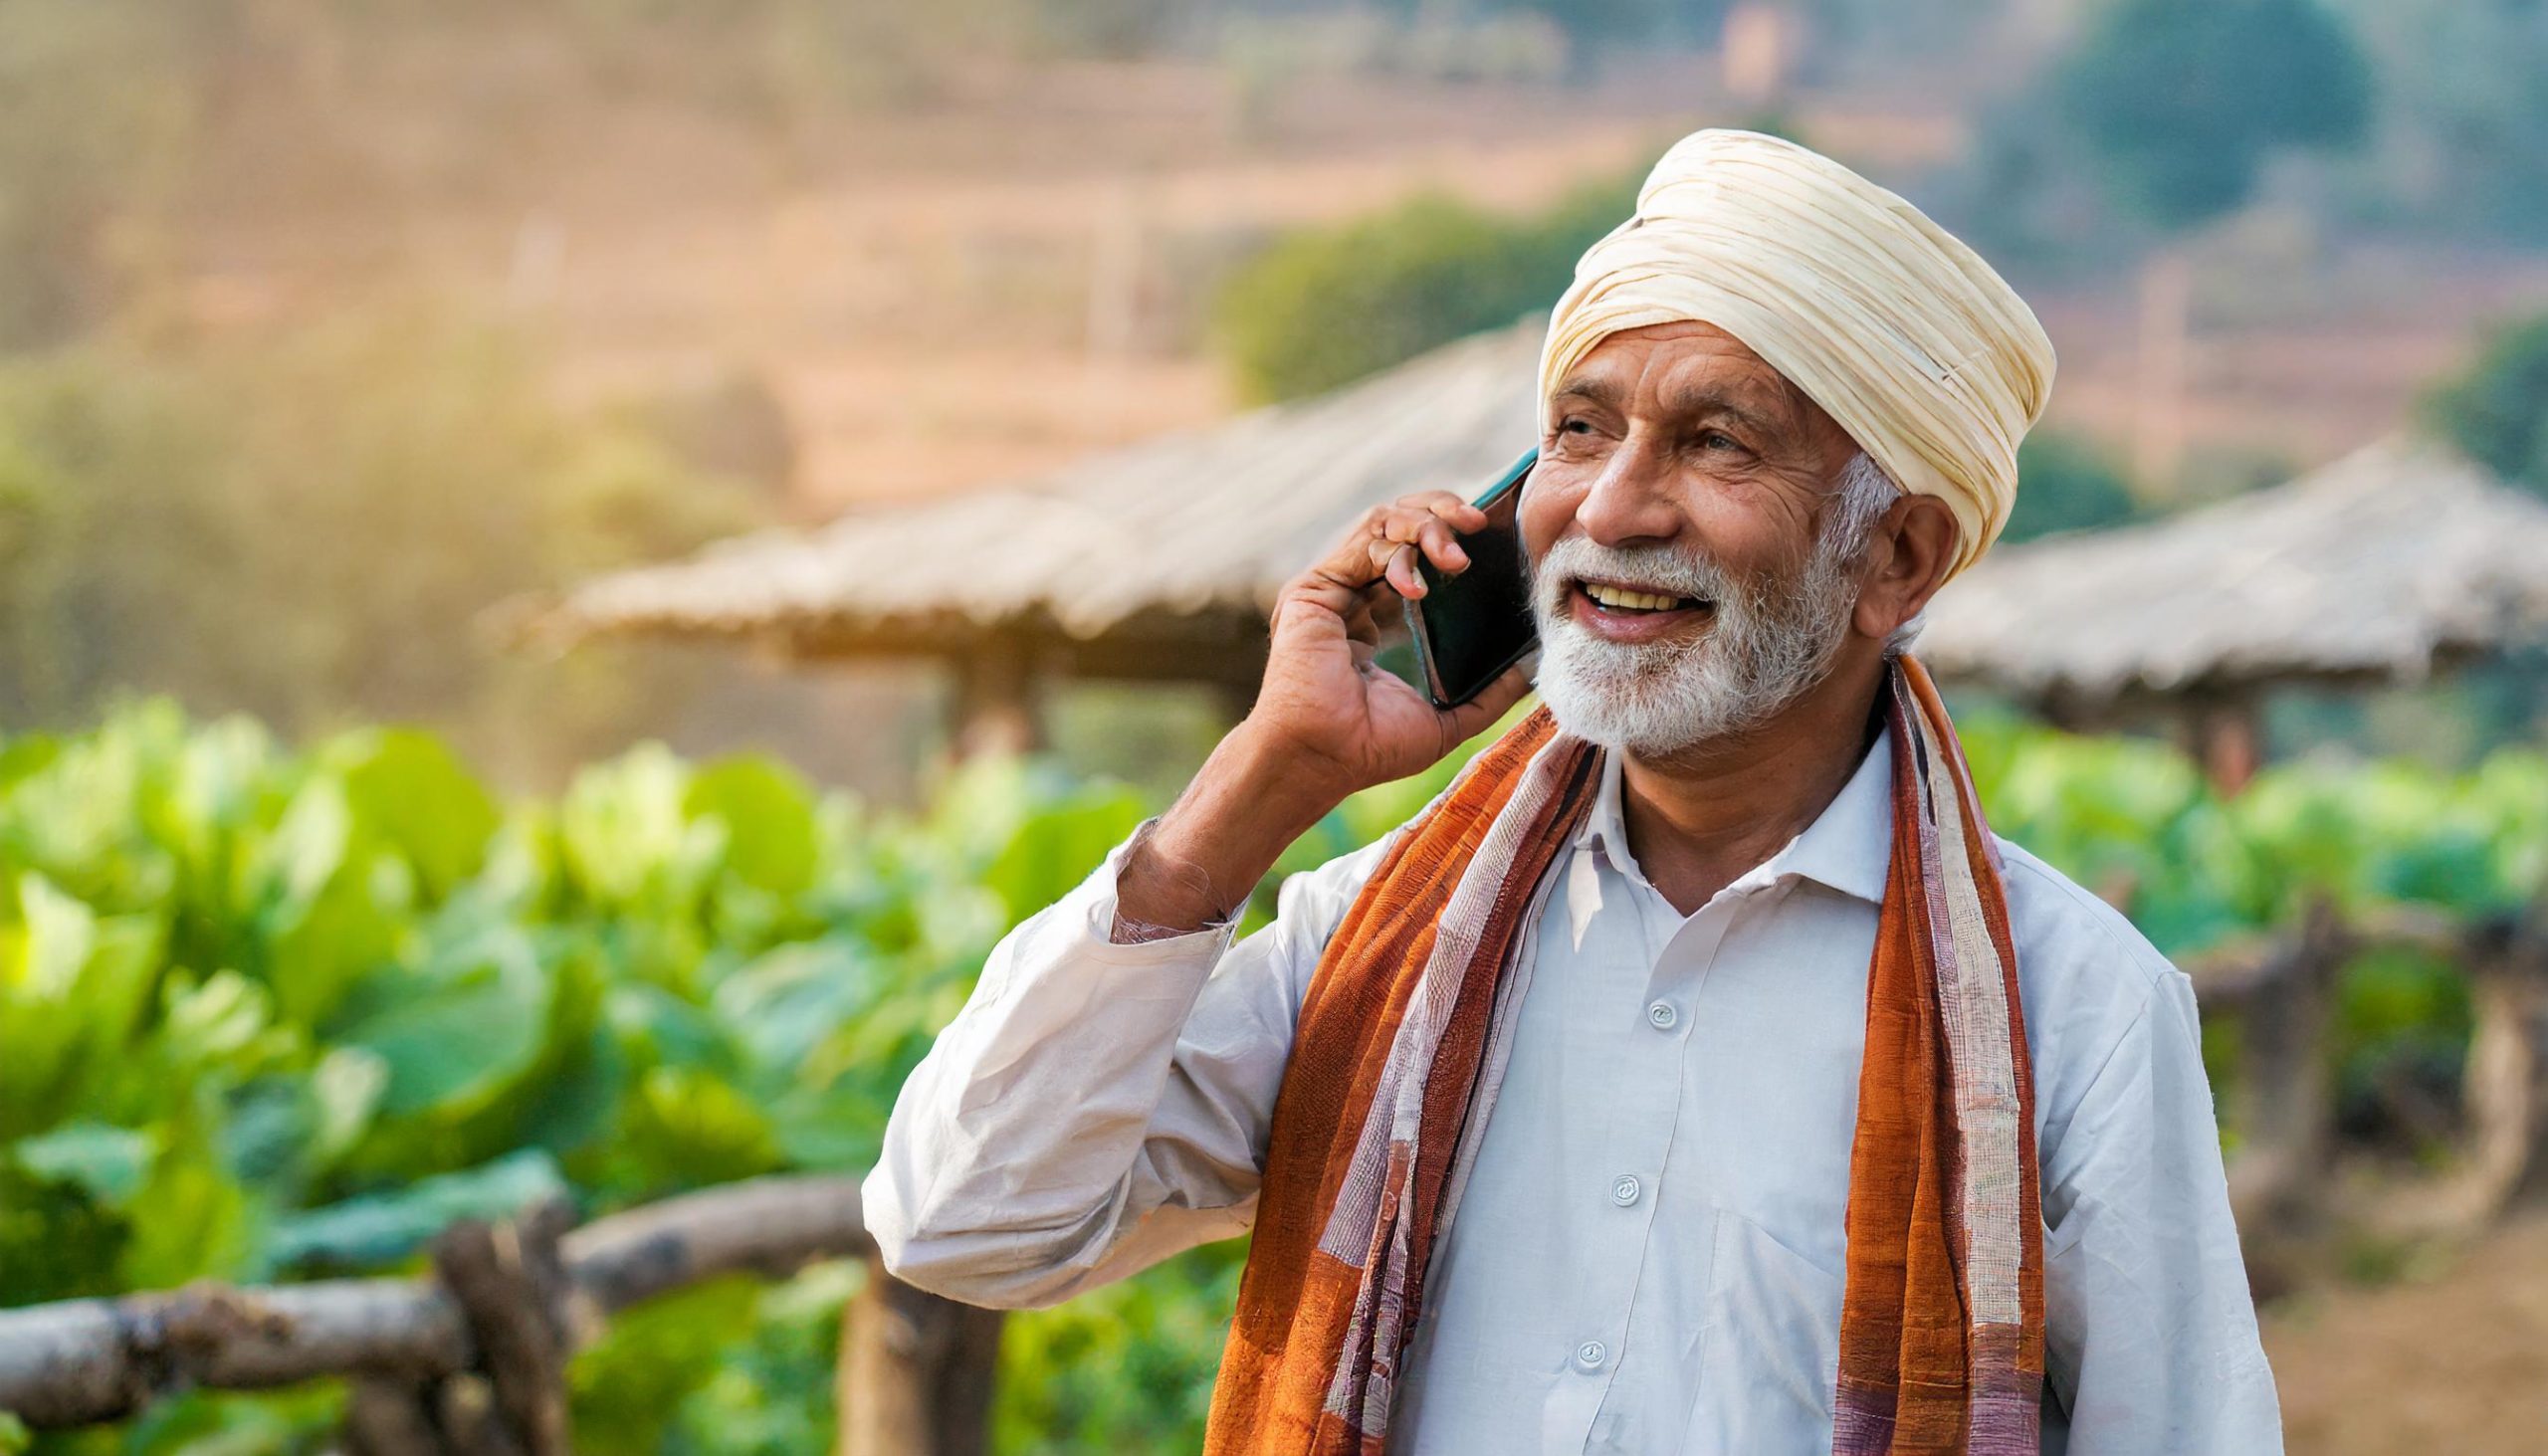 Telecom Industry in India: The evolving landscape